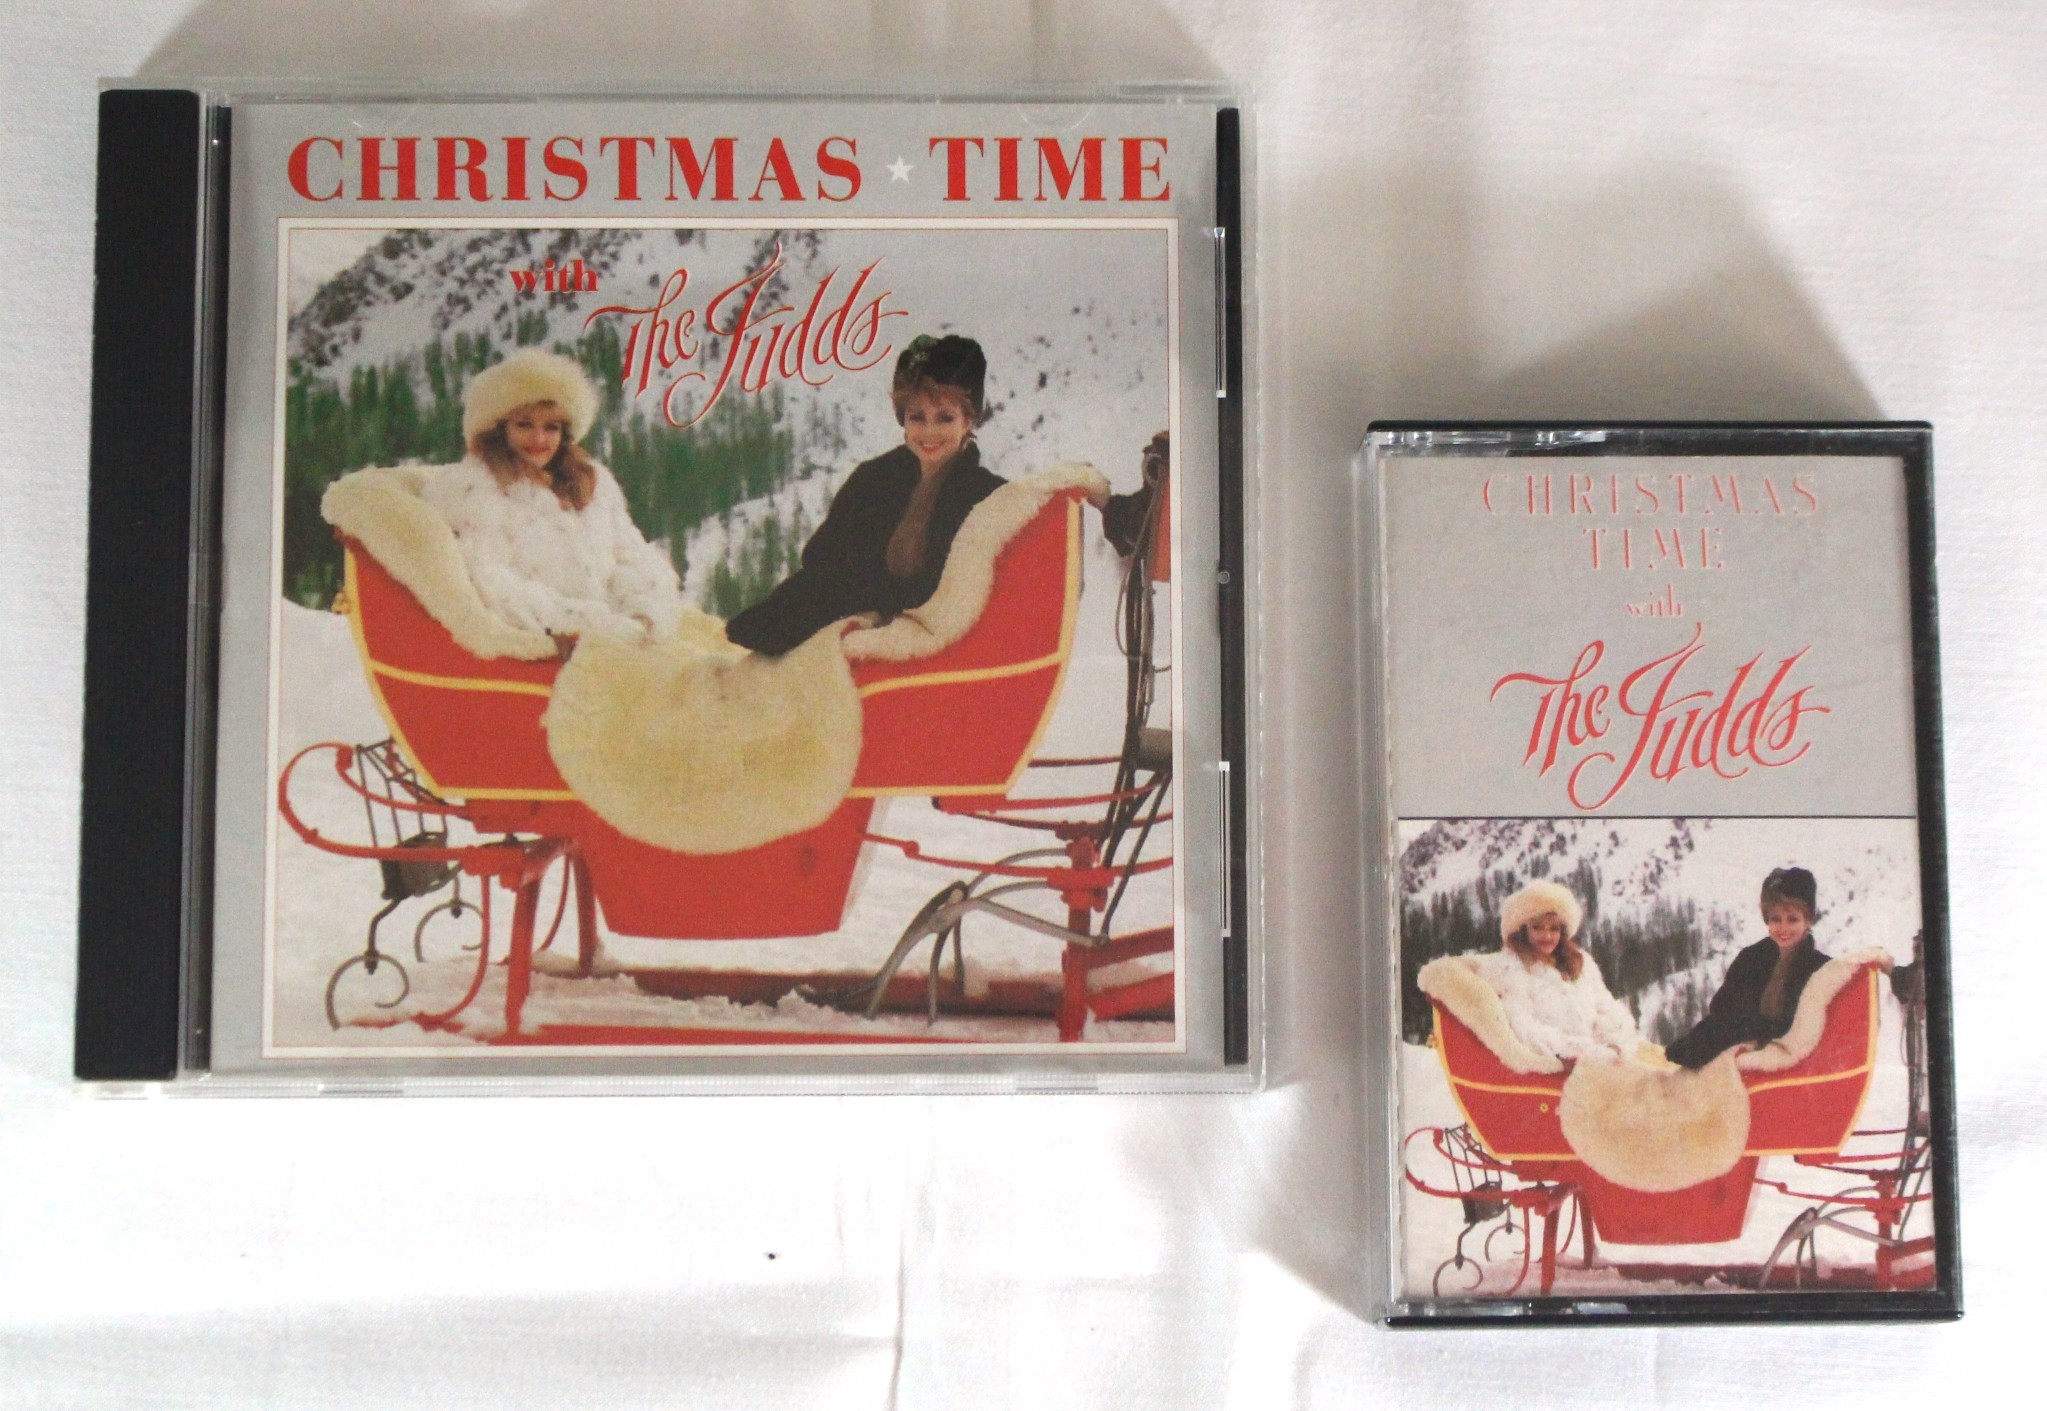 The Judds - “Christmas Time With The Judds” collection 